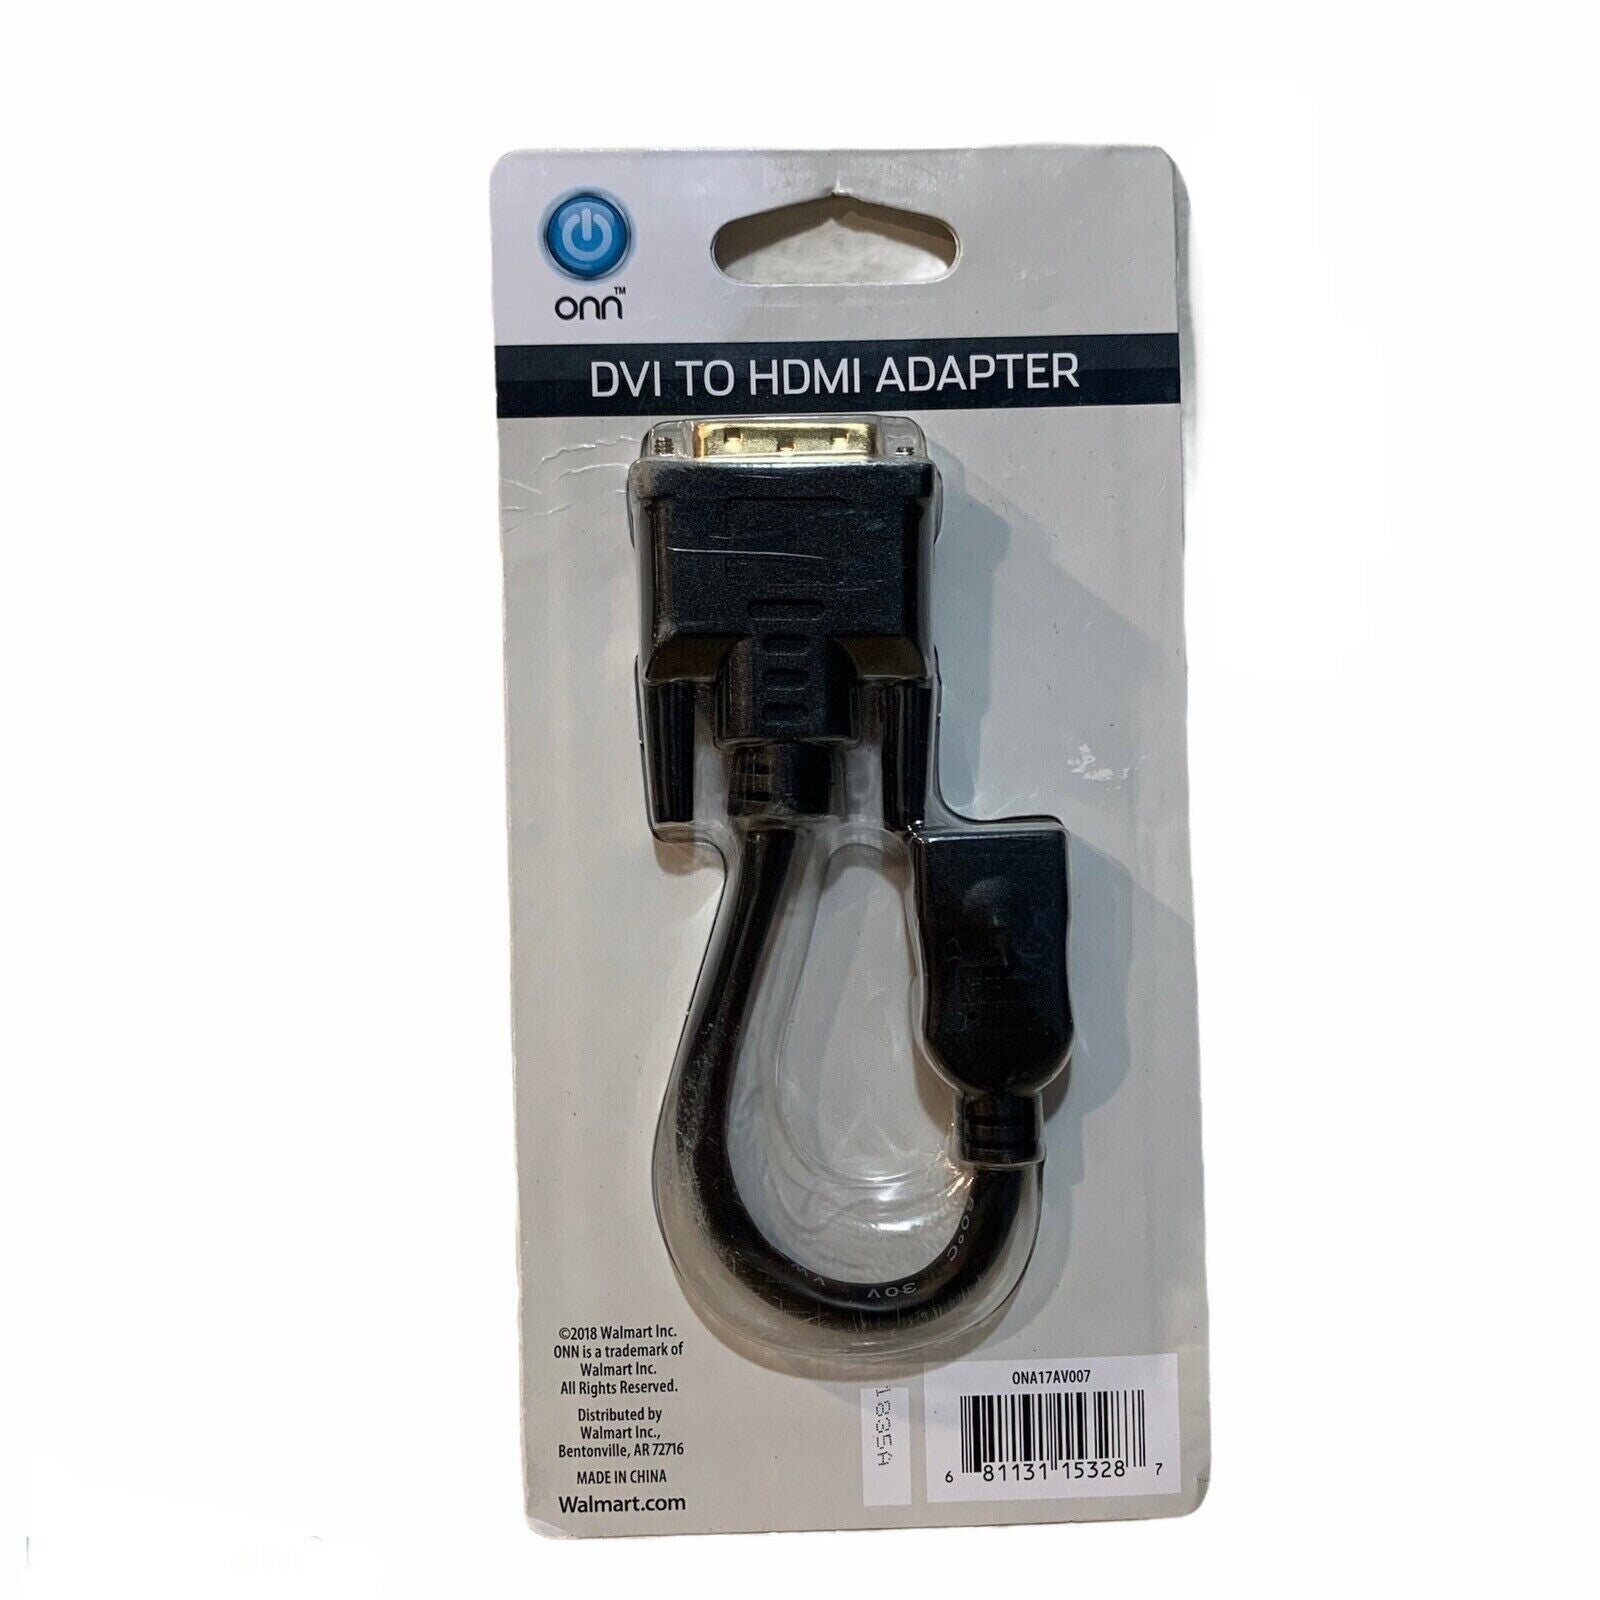 Onn DVI to HDMI Adapter Connector Cable Cord. ONA17AV007 Black